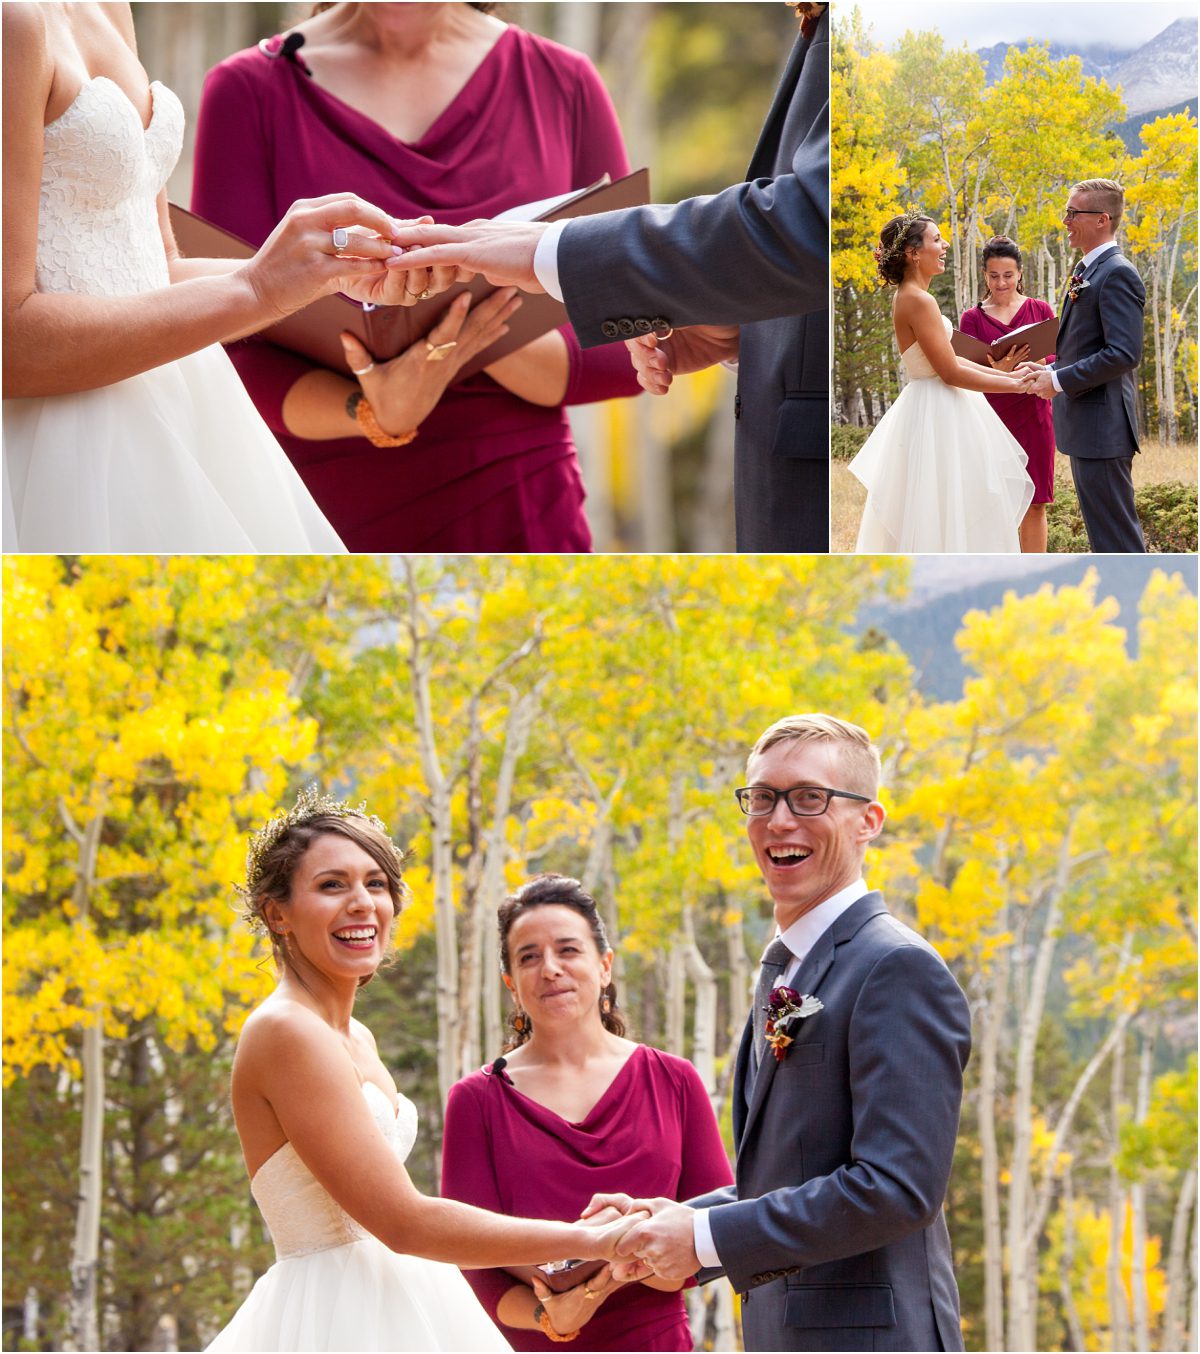 exchanging rings, outdoor ceremony, aspen trees, bride and groom,dao house, estes park, colorado wedding planning, mountain wedding planner